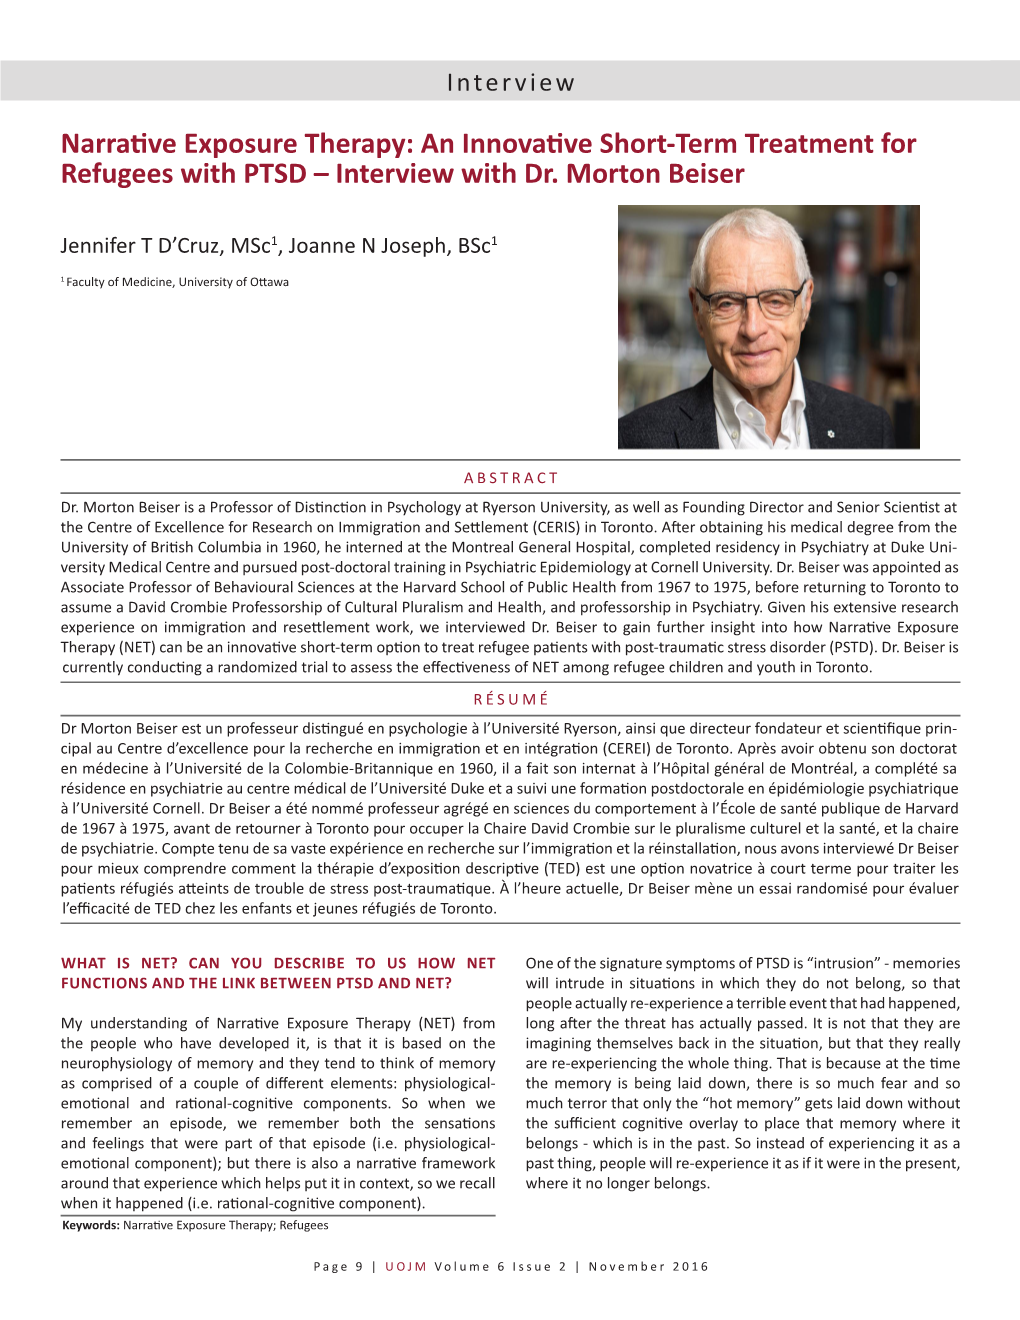 Narrative Exposure Therapy: an Innovative Short-Term Treatment for Refugees with PTSD – Interview with Dr. Morton Beiser